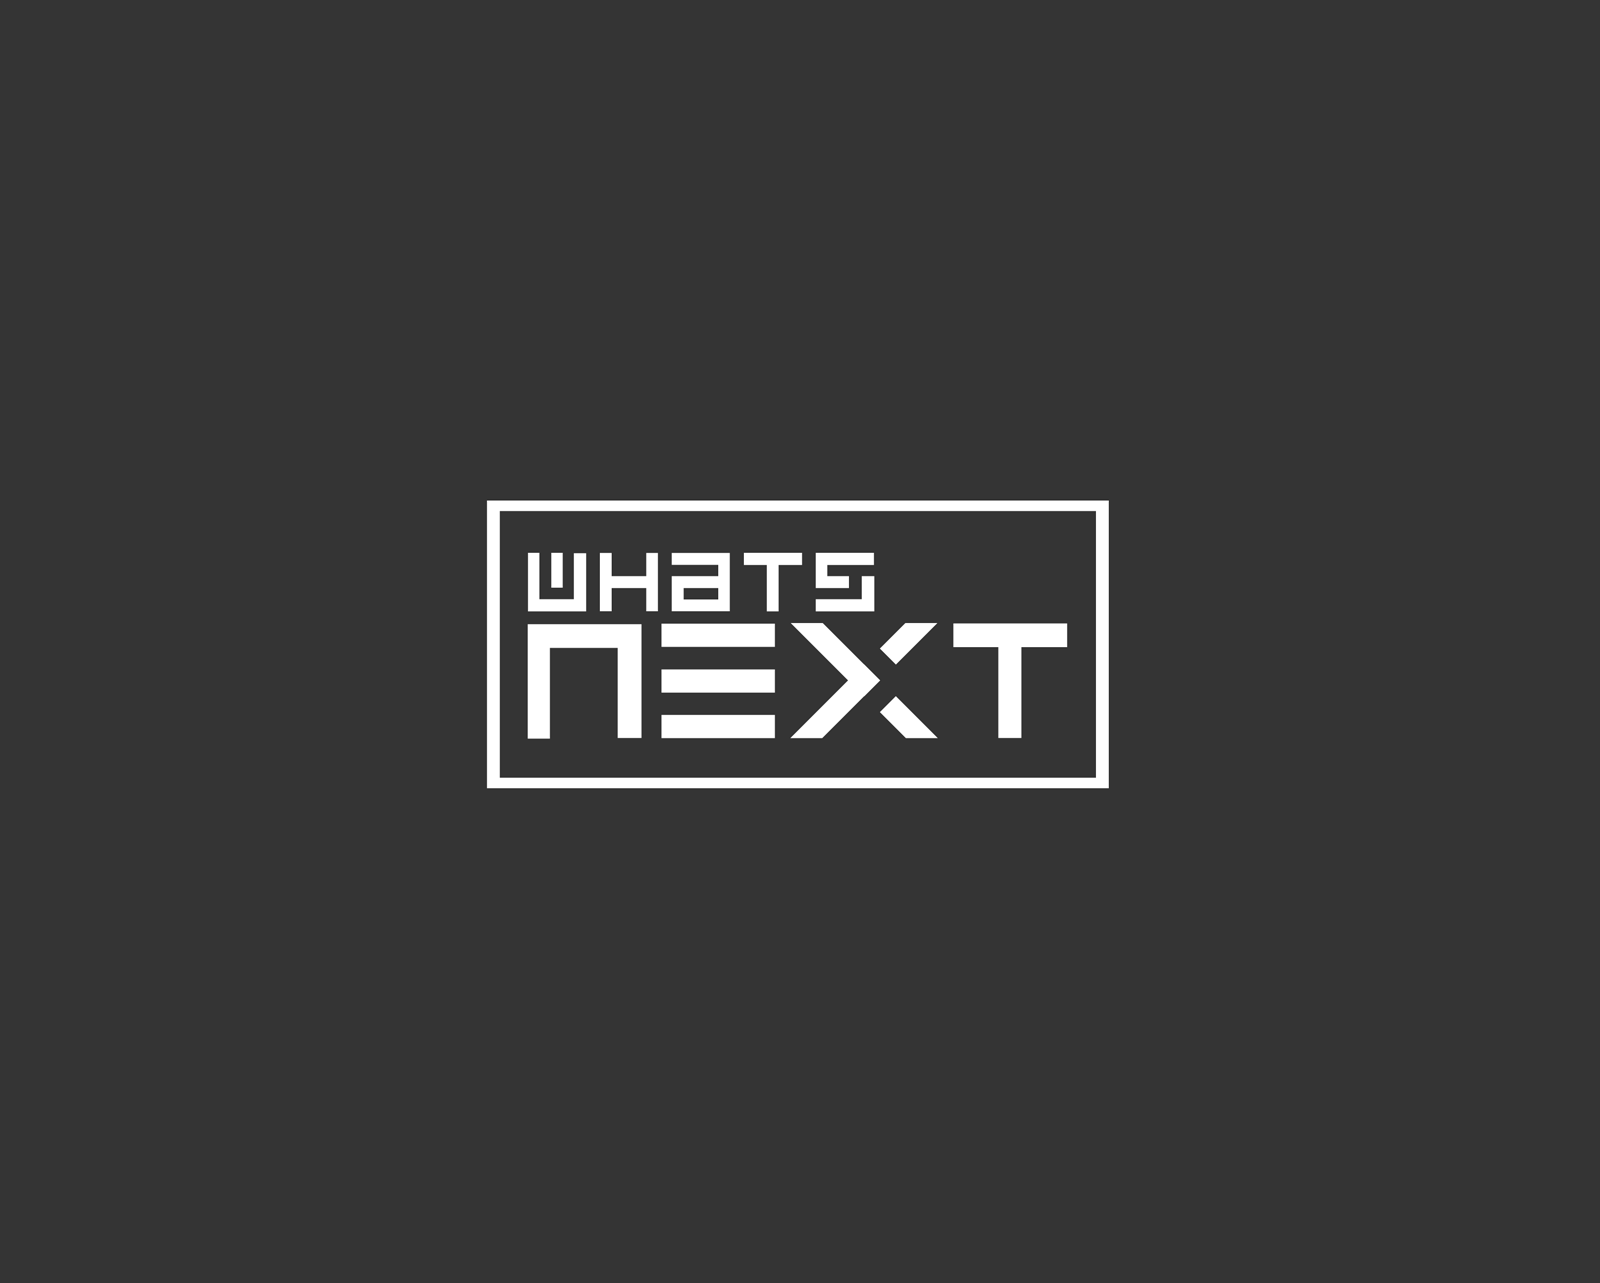 whats-next-fest-bwlogo.png